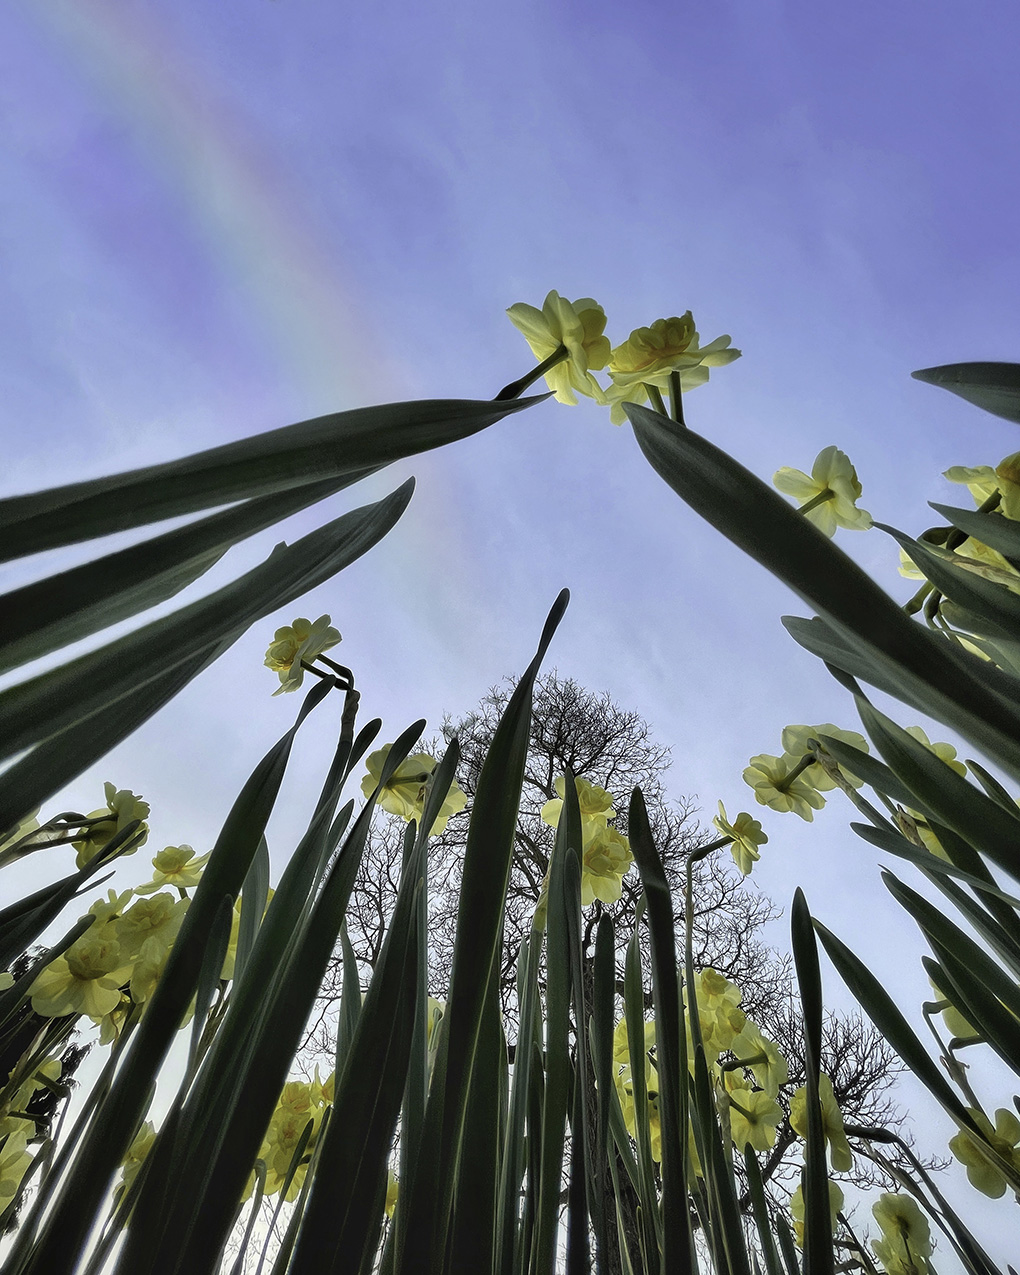 a photo of daffodils taken from an extremely low perspective, with a leafless tree, blue sky and a rainbow behind